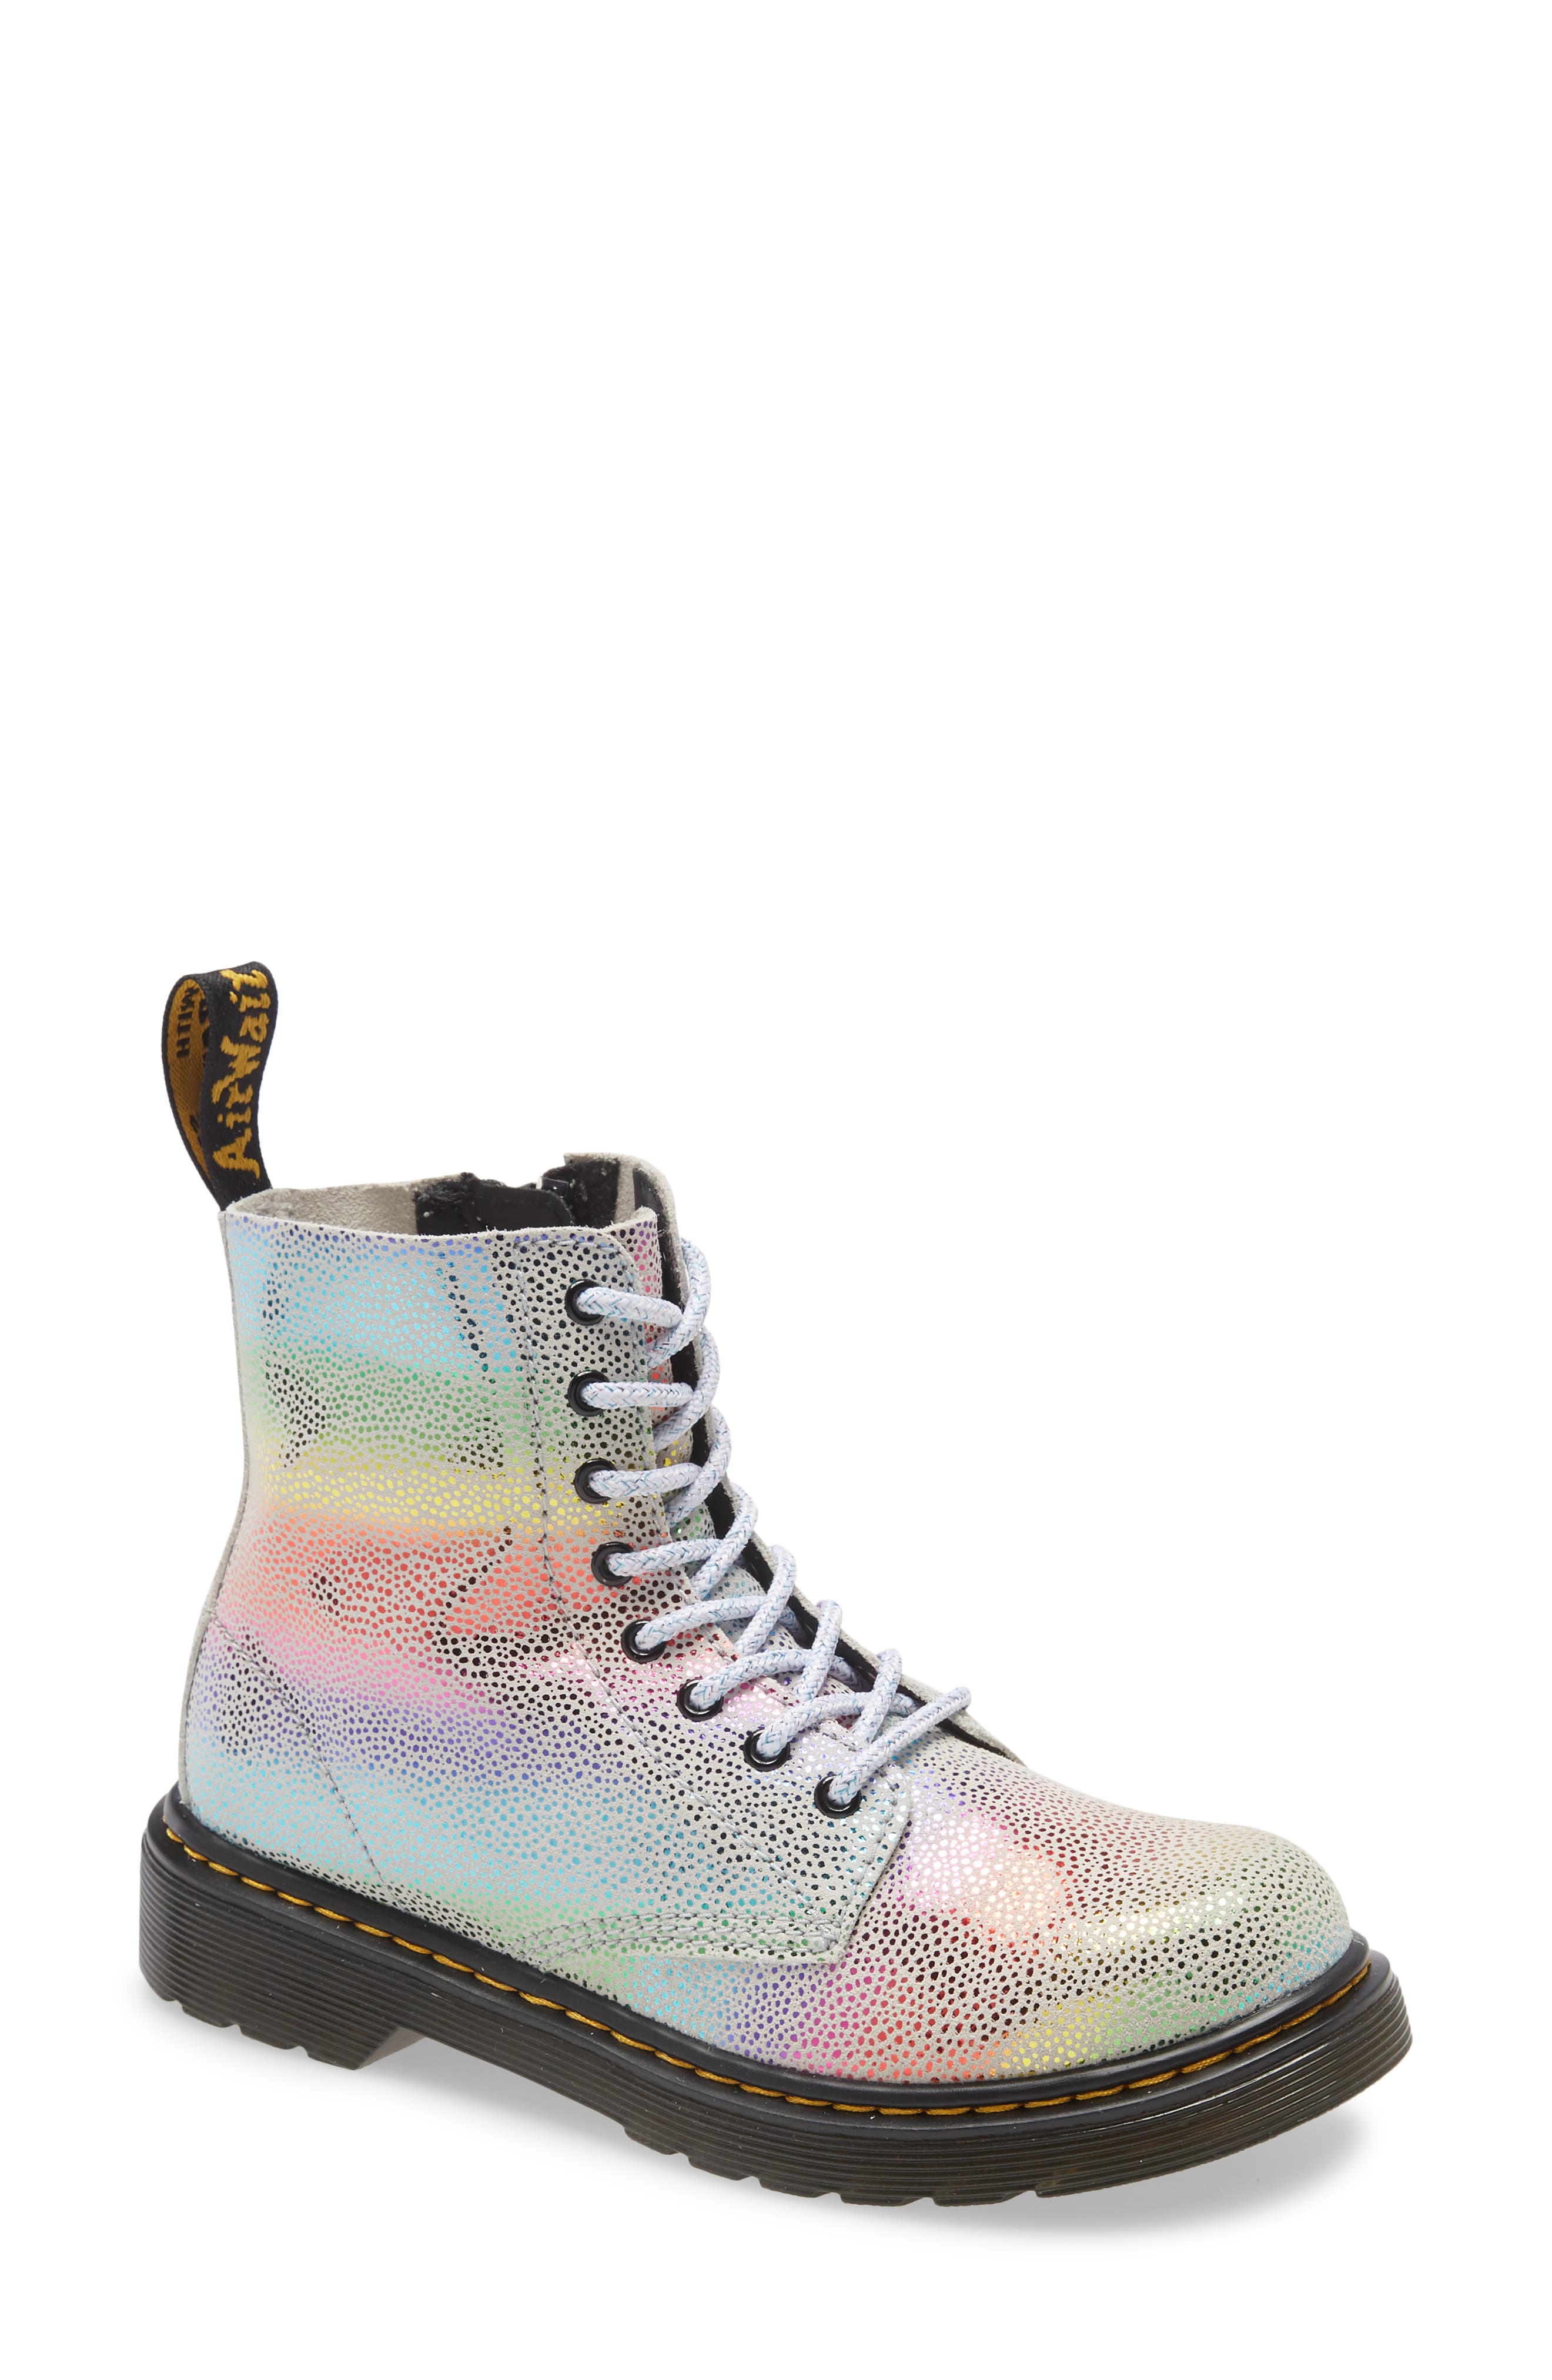 womens patterned boots Shoes Womens Shoes Boots Work & Combat Boots Celestial rainbow combat boots design 